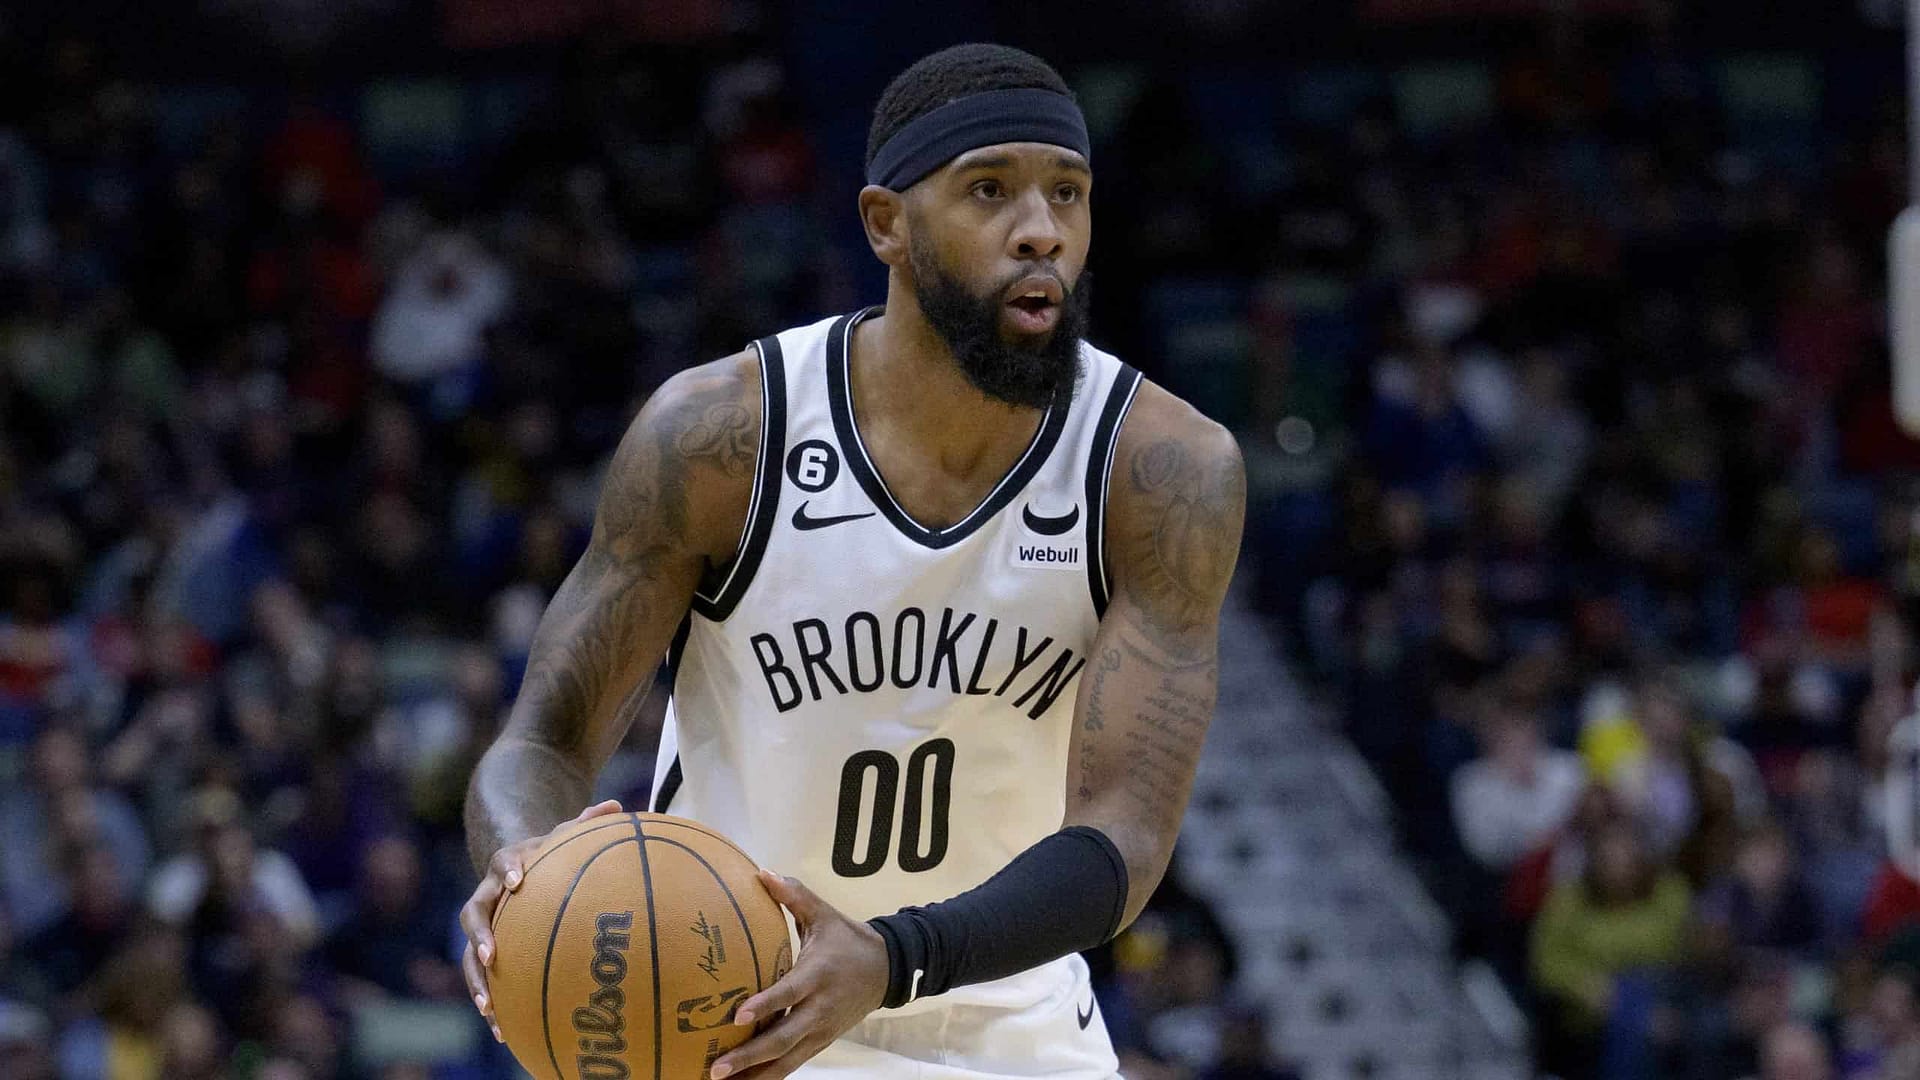 The Nets take on the Celtics tonight, and one NBA player prop that stands out involves Royce O'Neal and his scoring and rebounding...